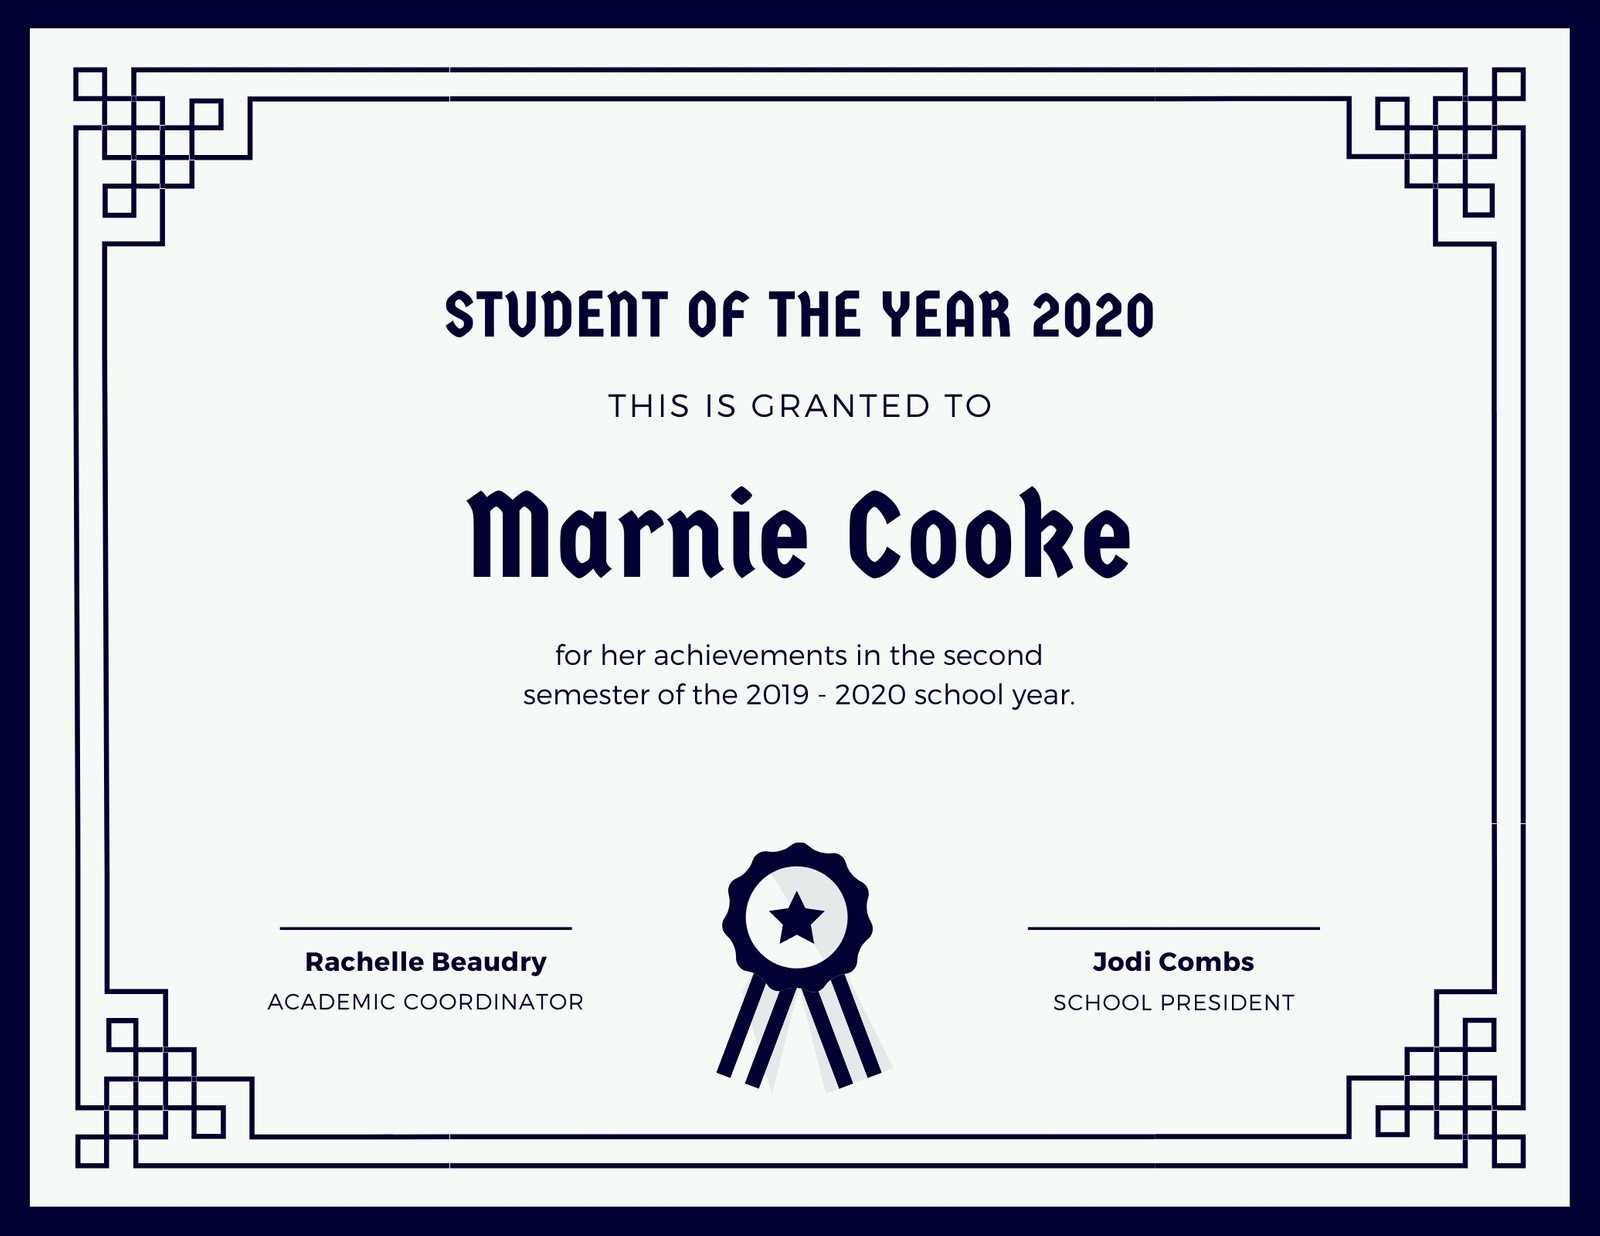 Free Printable, Customizable Student Certificate Templates  Canva Inside Student Of The Year Award Certificate Templates